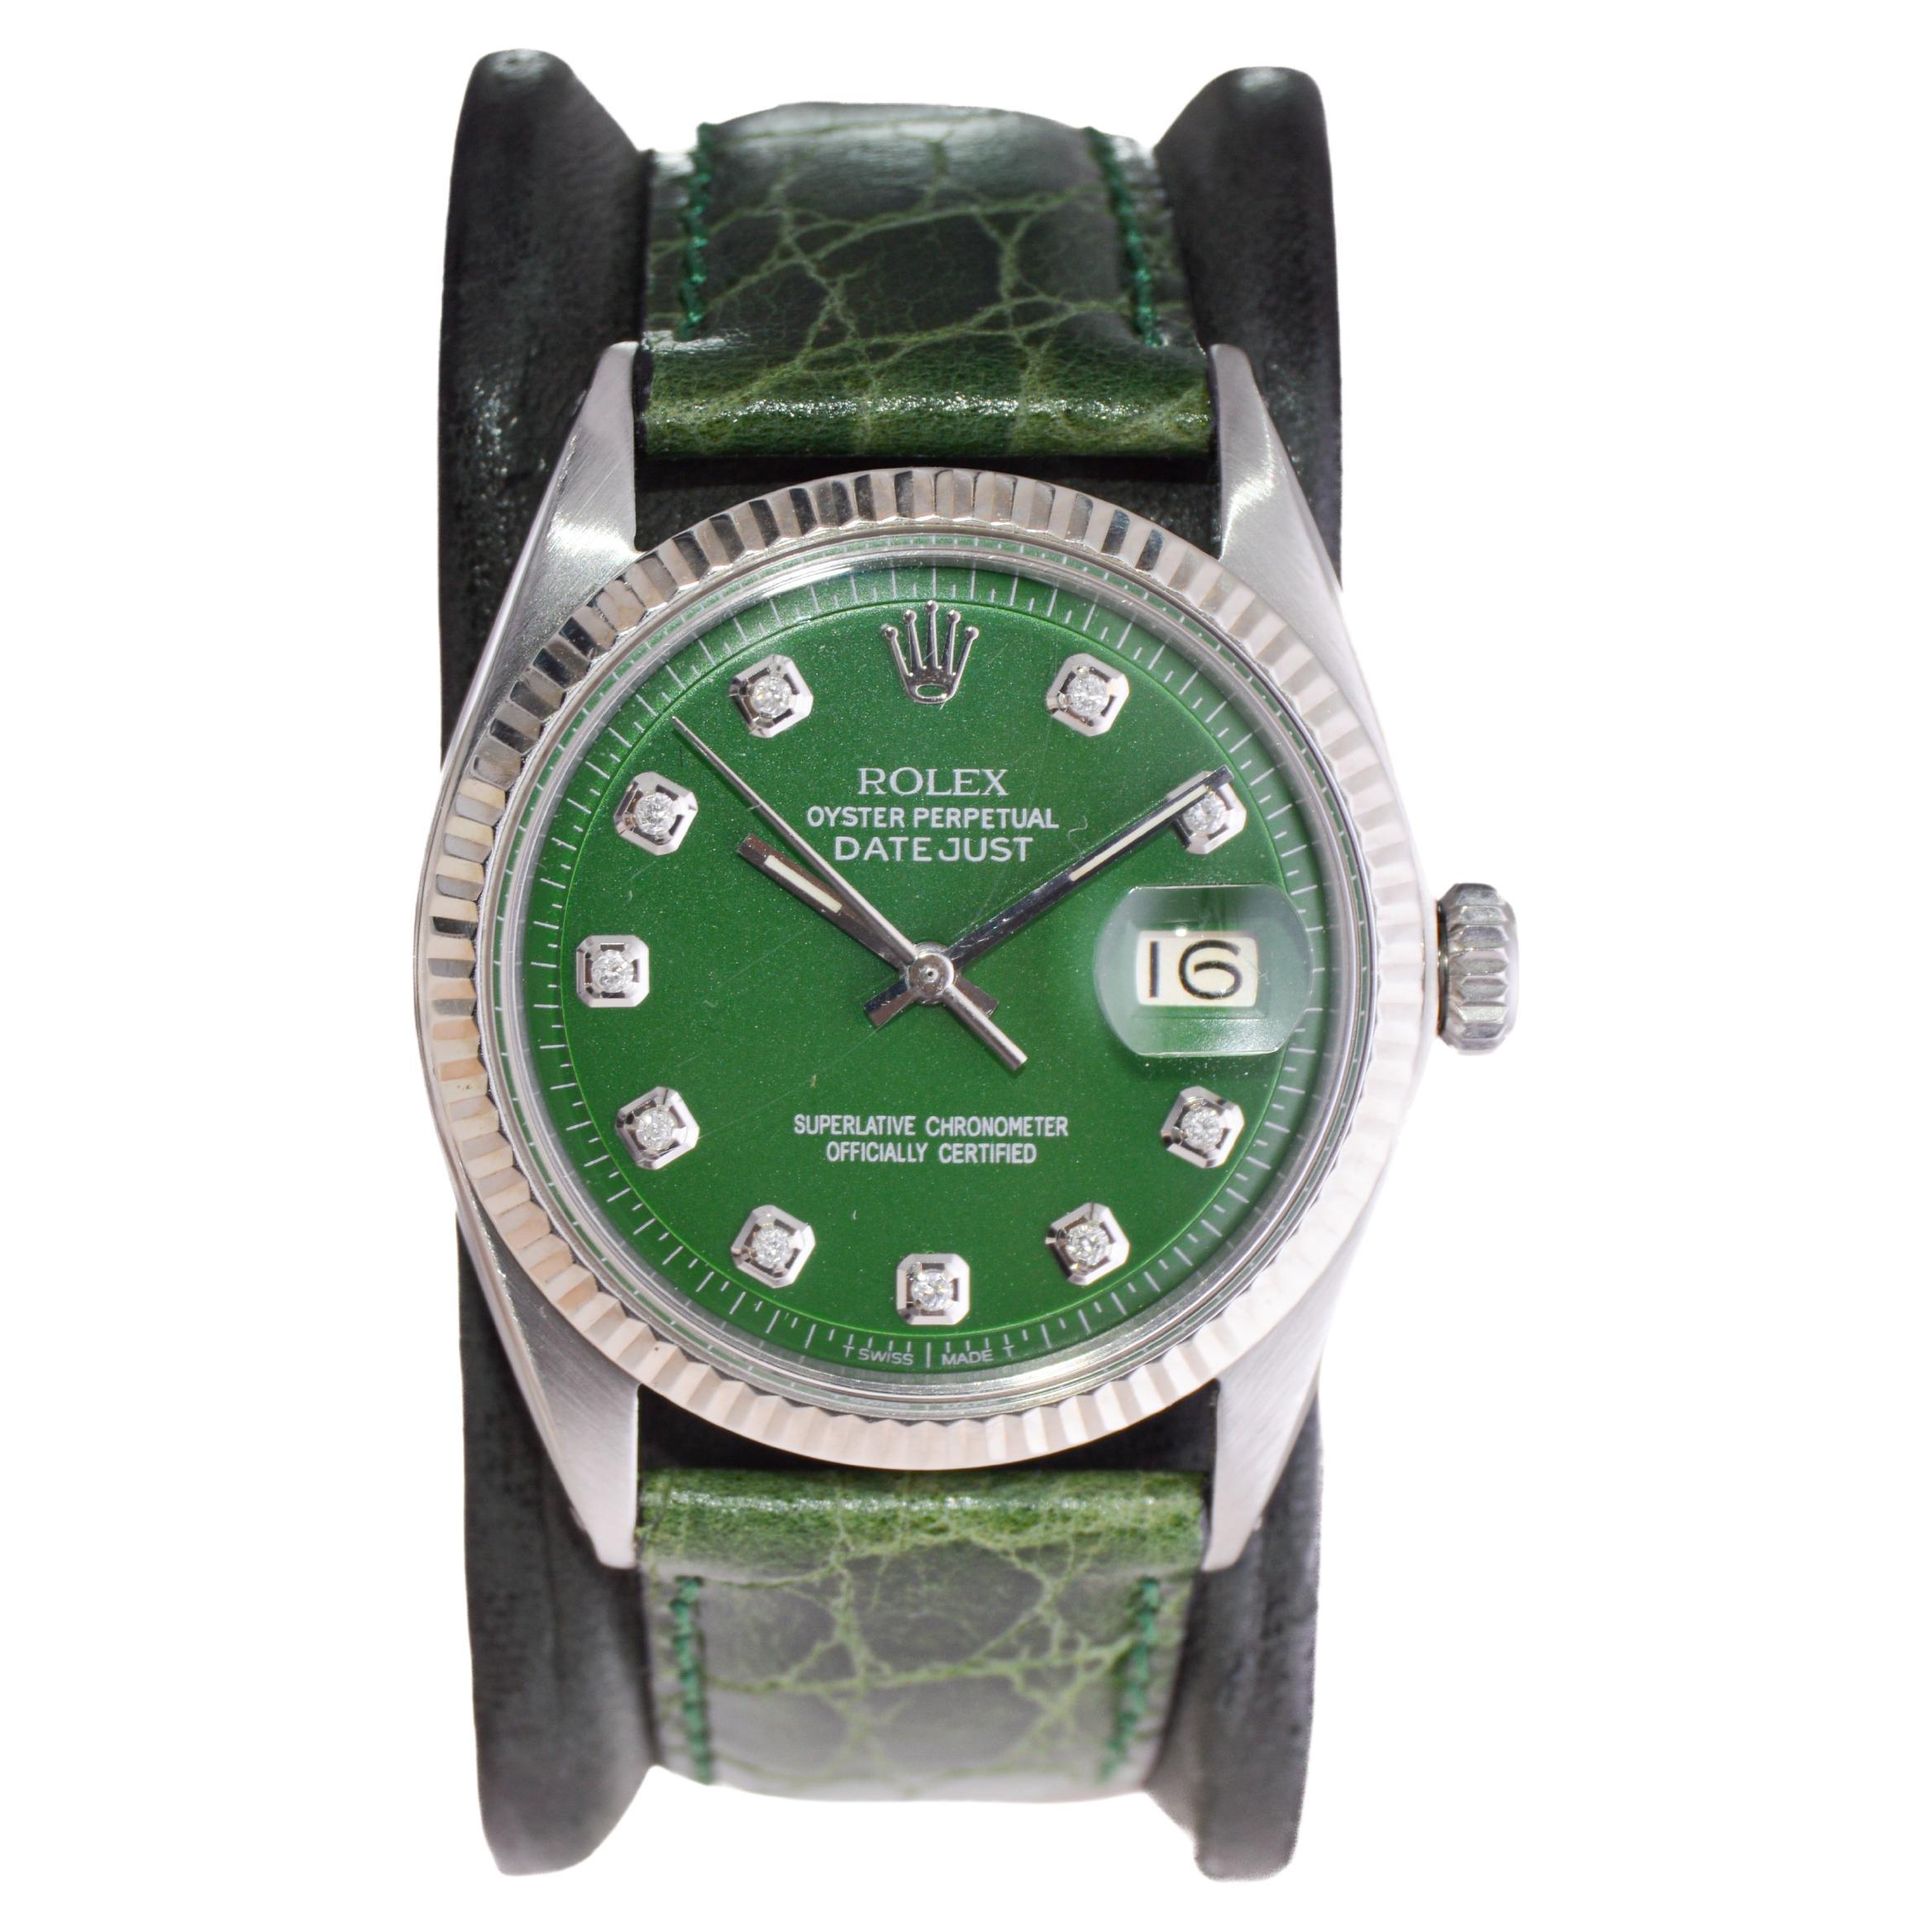 Rolex Stainless Steel Datejust with Custom Green Dial and Diamond Markers 1960's